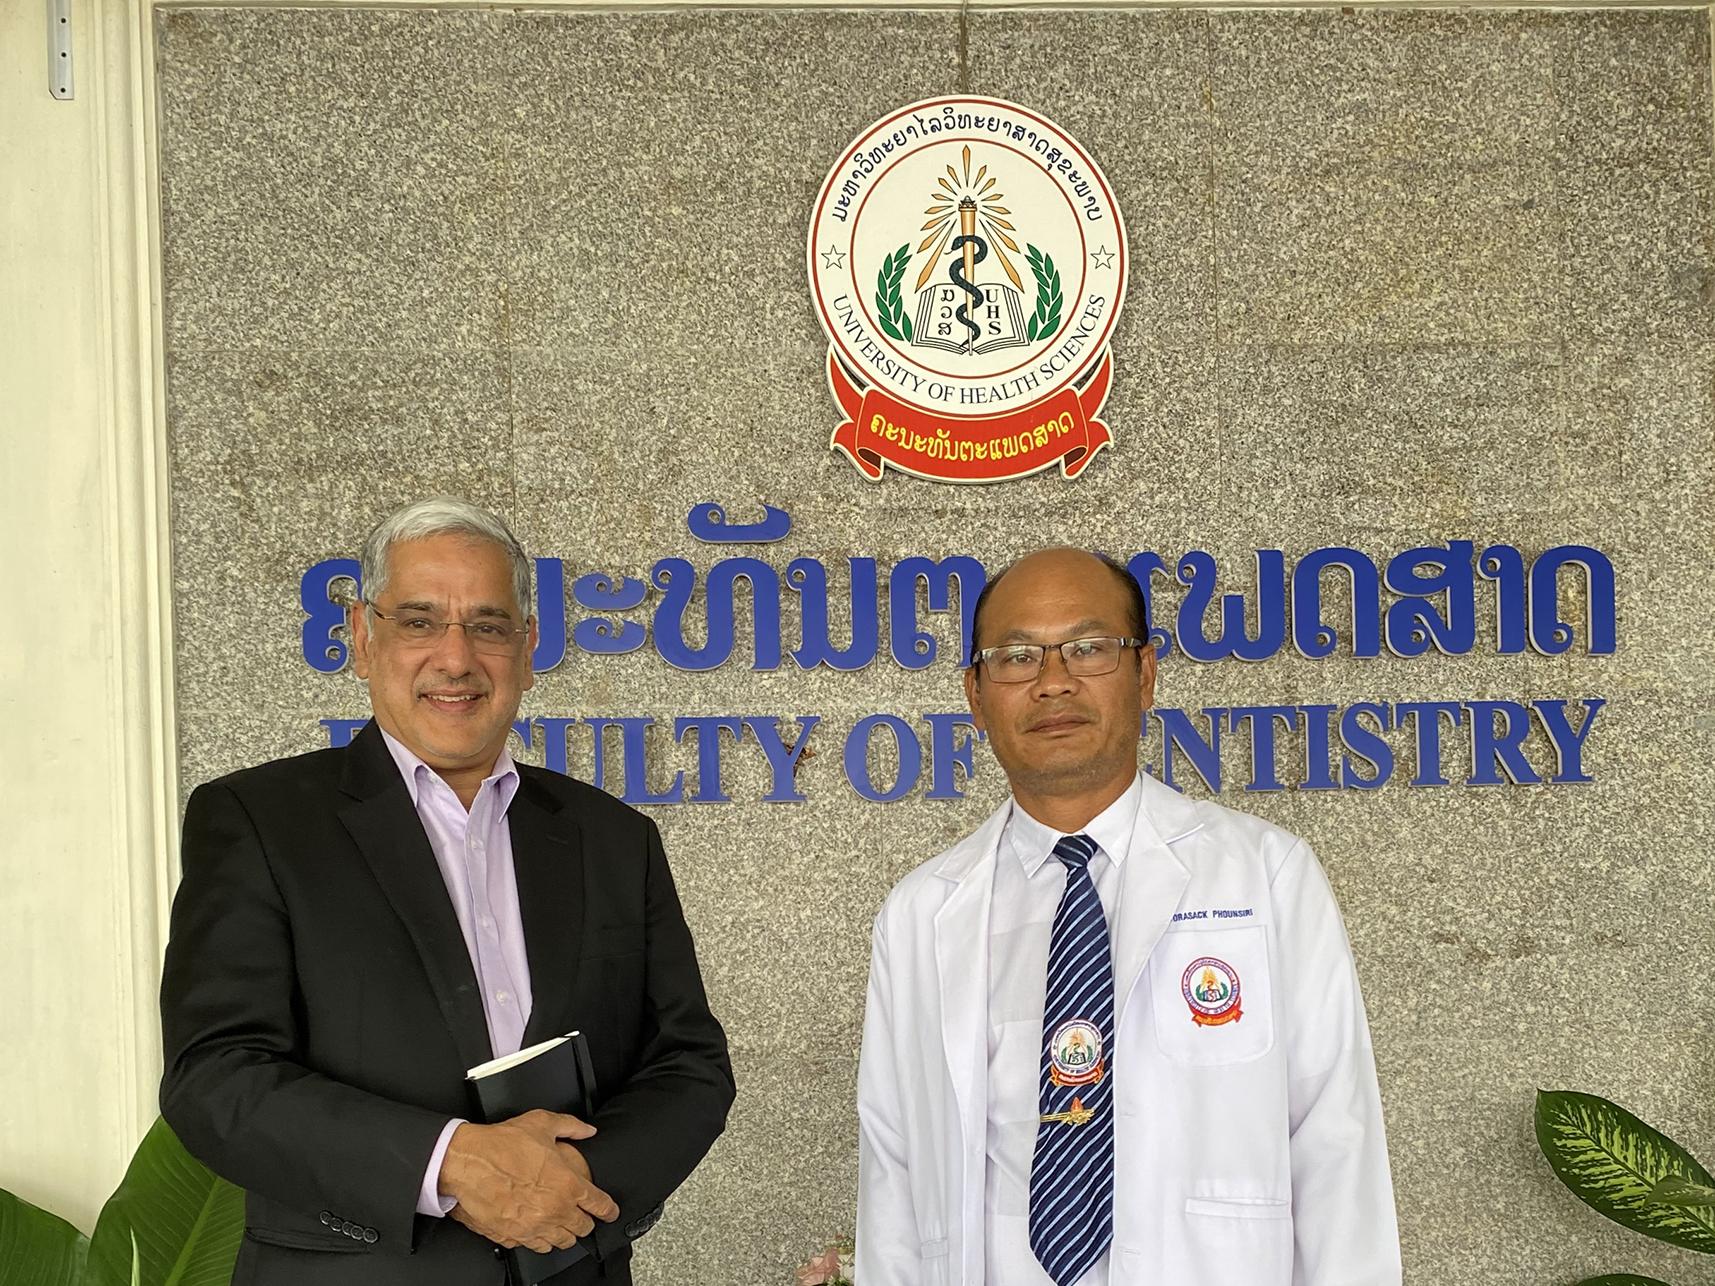 At the University of Health Sciences, LaoPDR